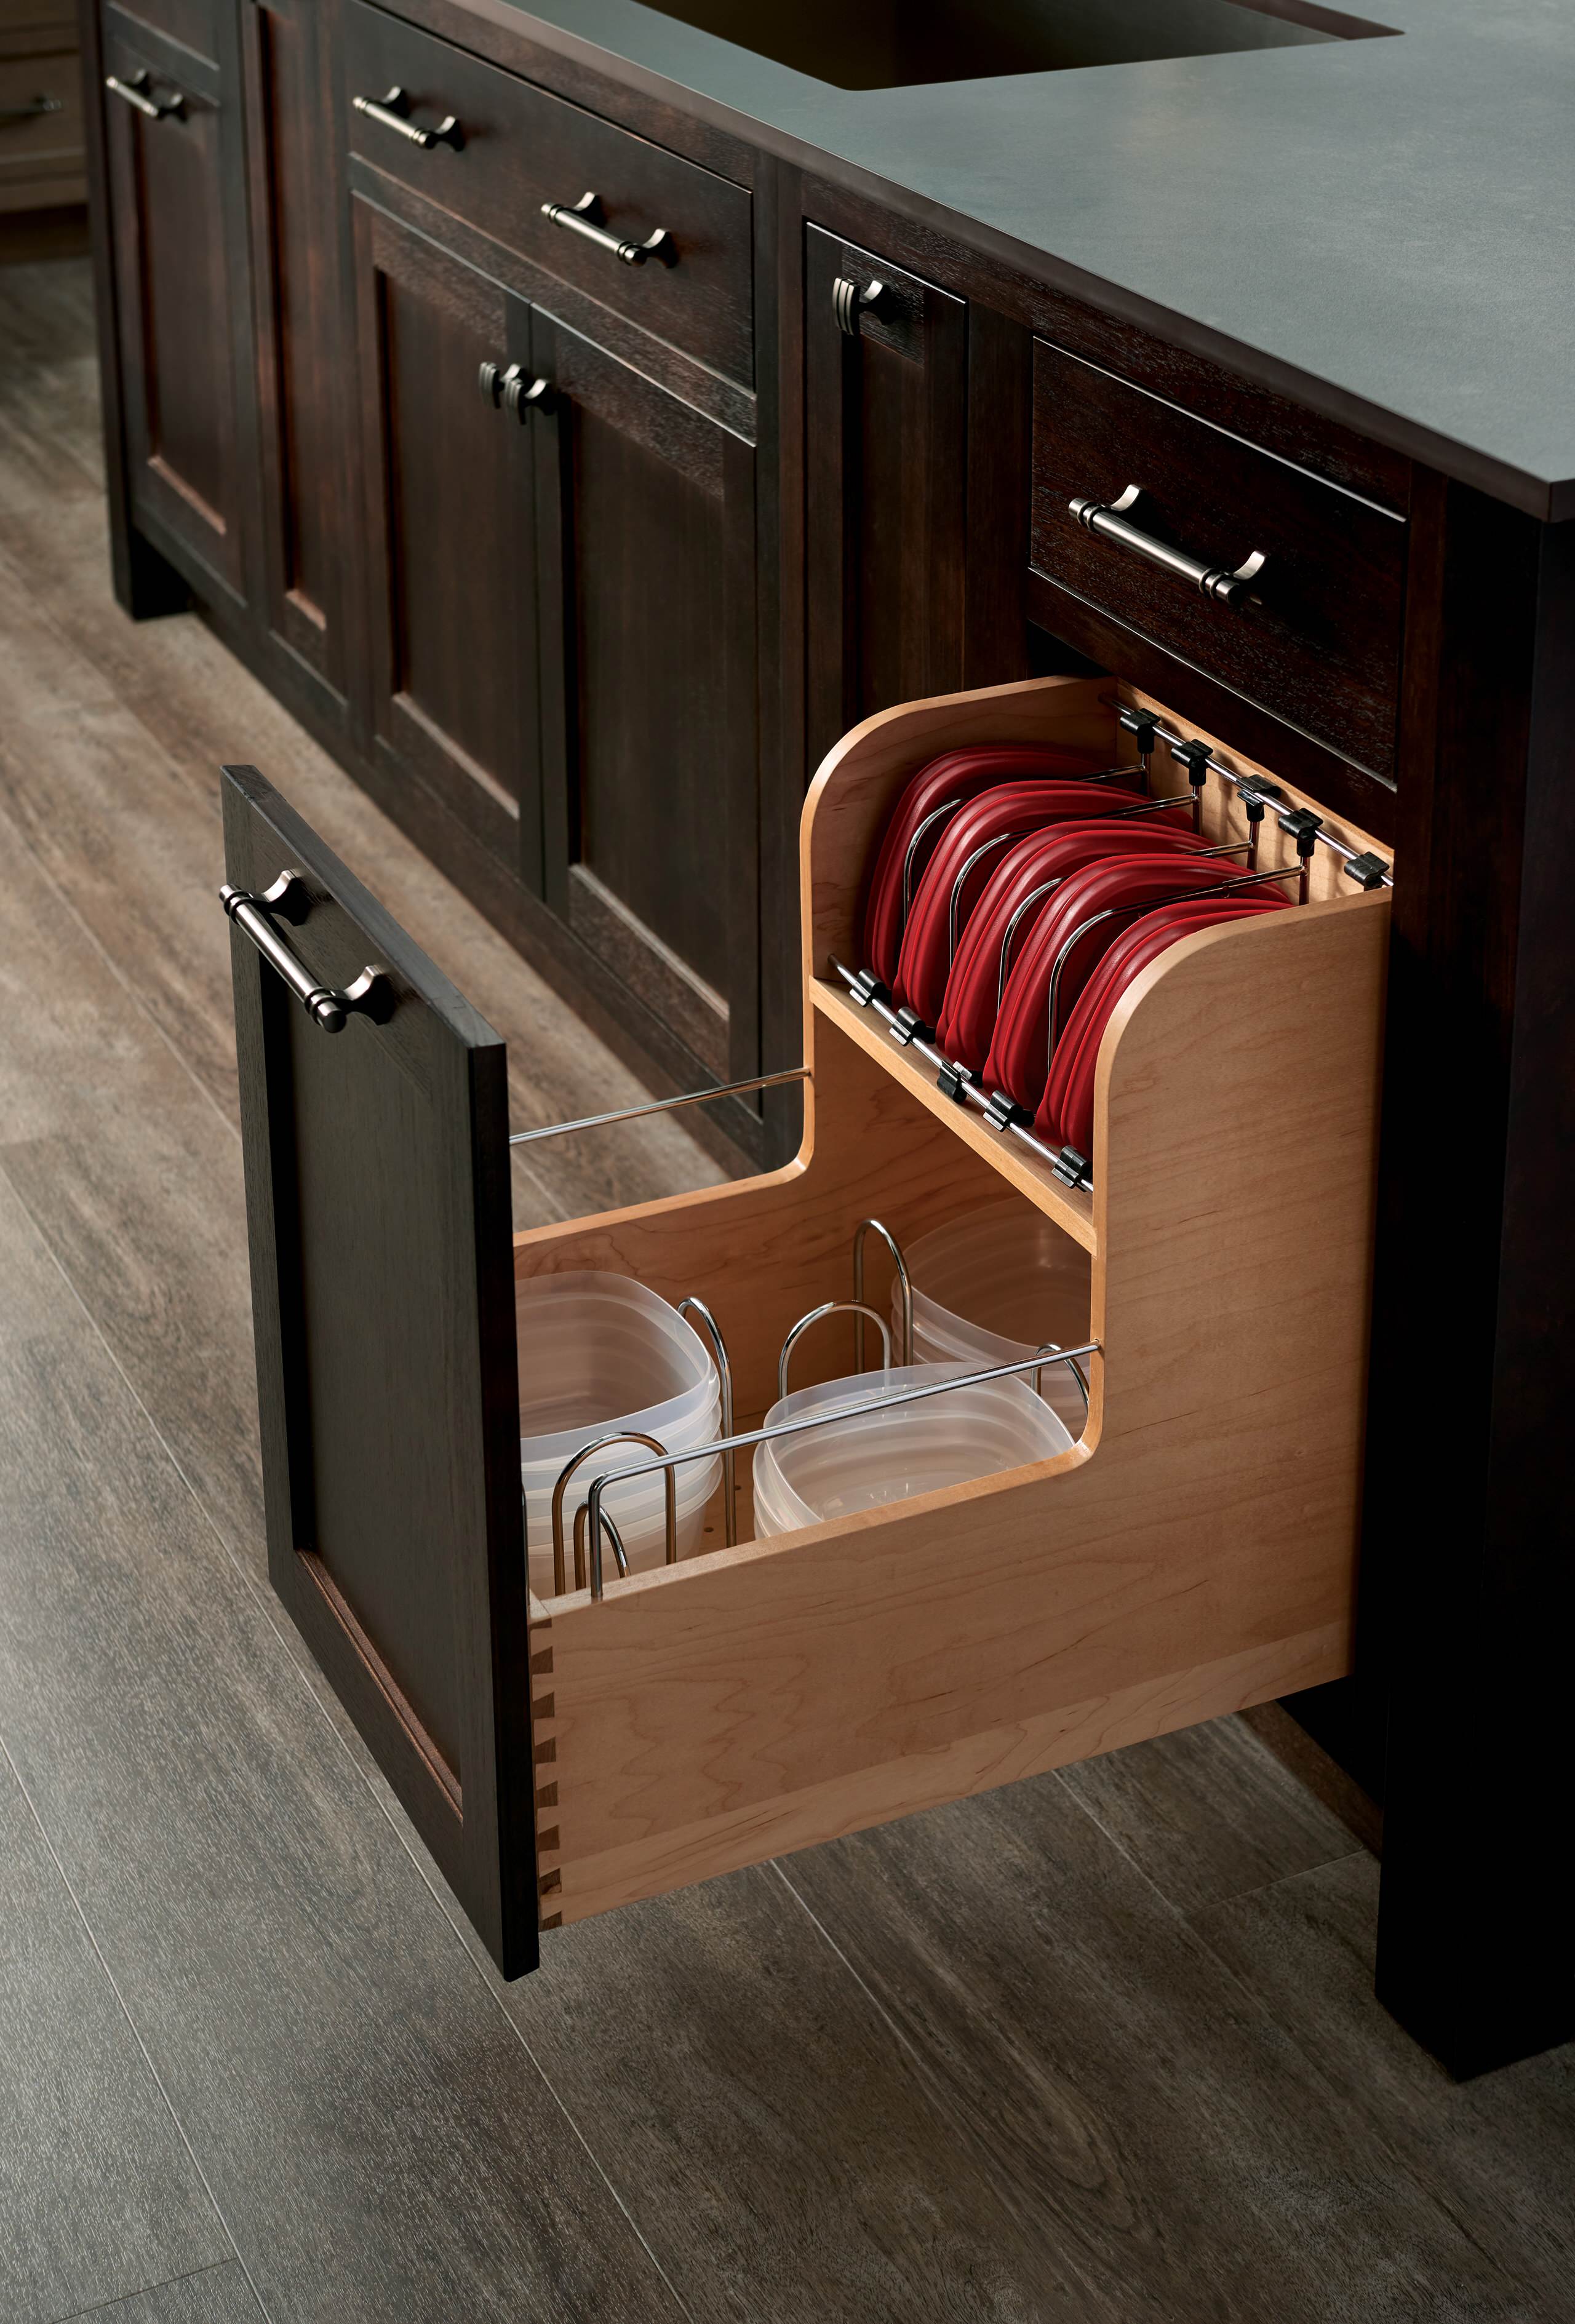 Starmark Cabinetry Base Plastic Ware Storage Cabinet Farmhouse Kitchen Other By Starmark Cabinetry Houzz